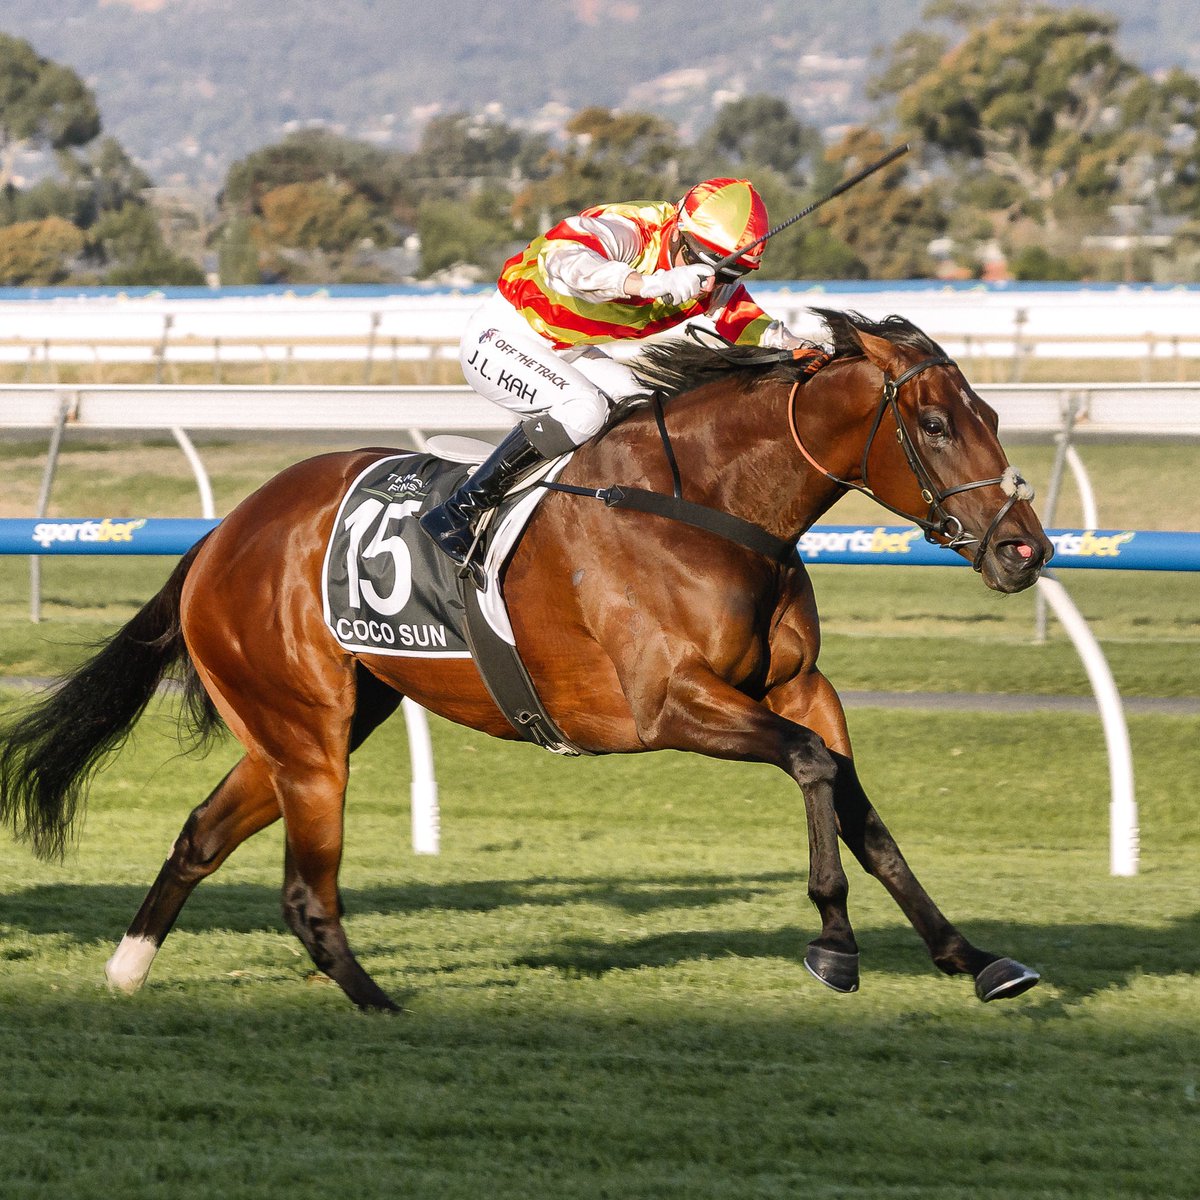 Five of our favourite Group One moments from the Adelaide Racing Carnival: 1. The South Australian Derby saw Jamie Kah claim her first Group One glory in her home state (pictured). 2. Coco Sun becoming just the third filly or mare to win the Group One South Australian Derby in